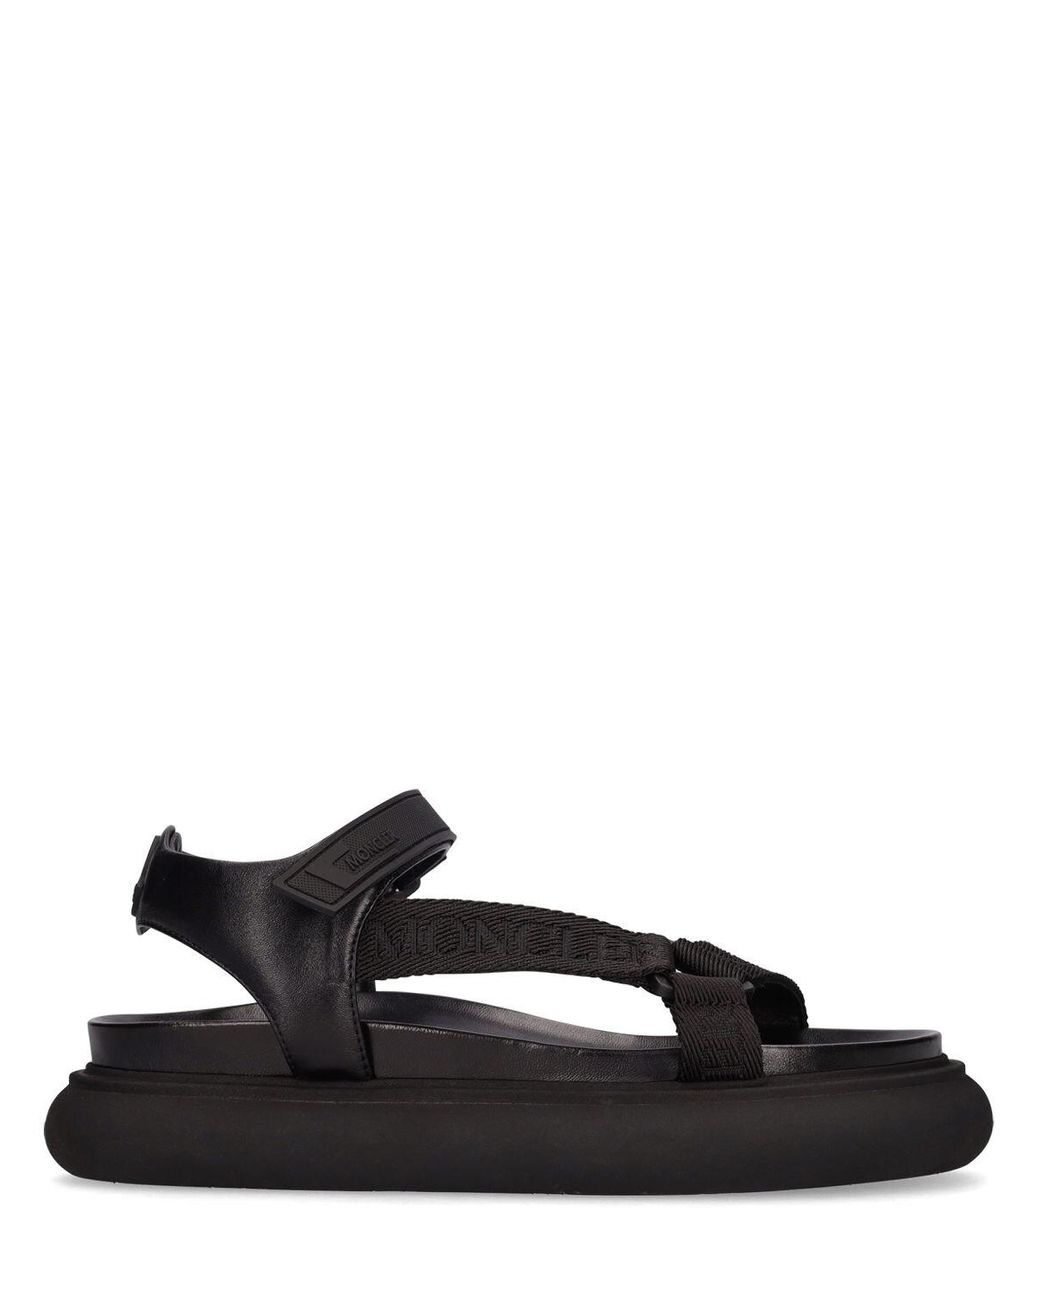 Moncler 35mm Catura Leather & Webbing Sandals in Black | Lyst UK